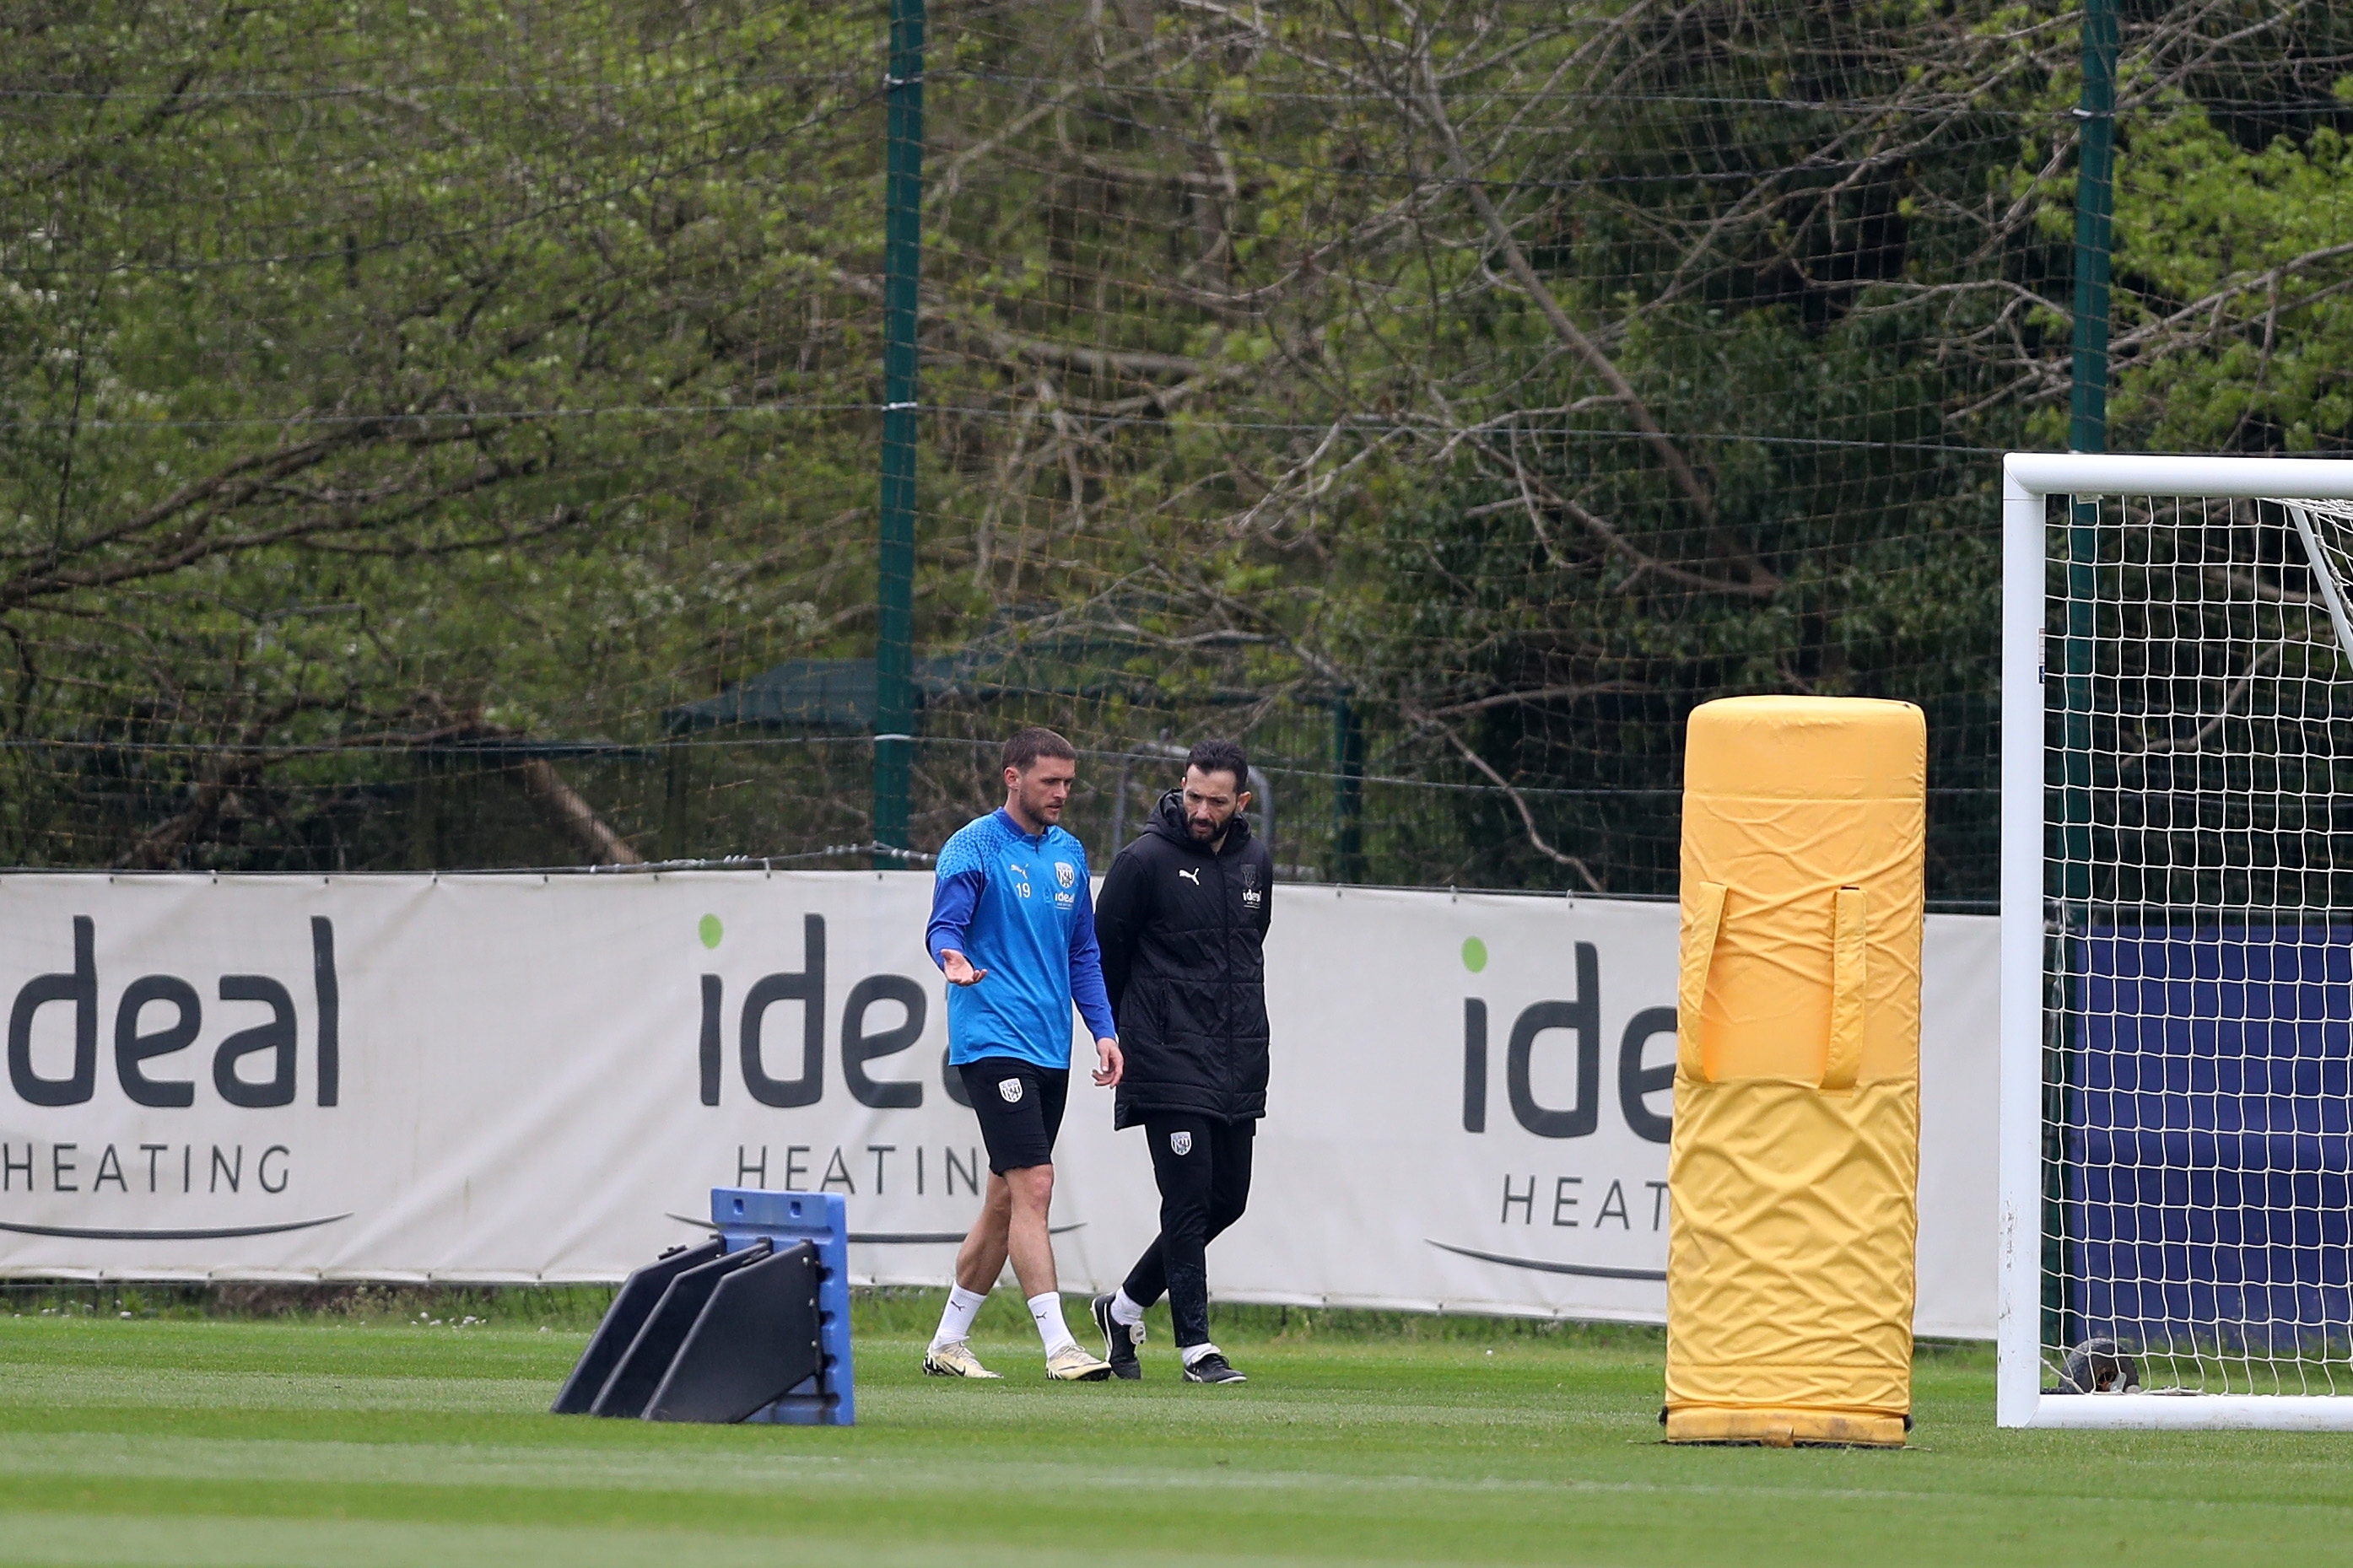 Carlos Corberán and John Swift having a chat on the side of the training pitch 